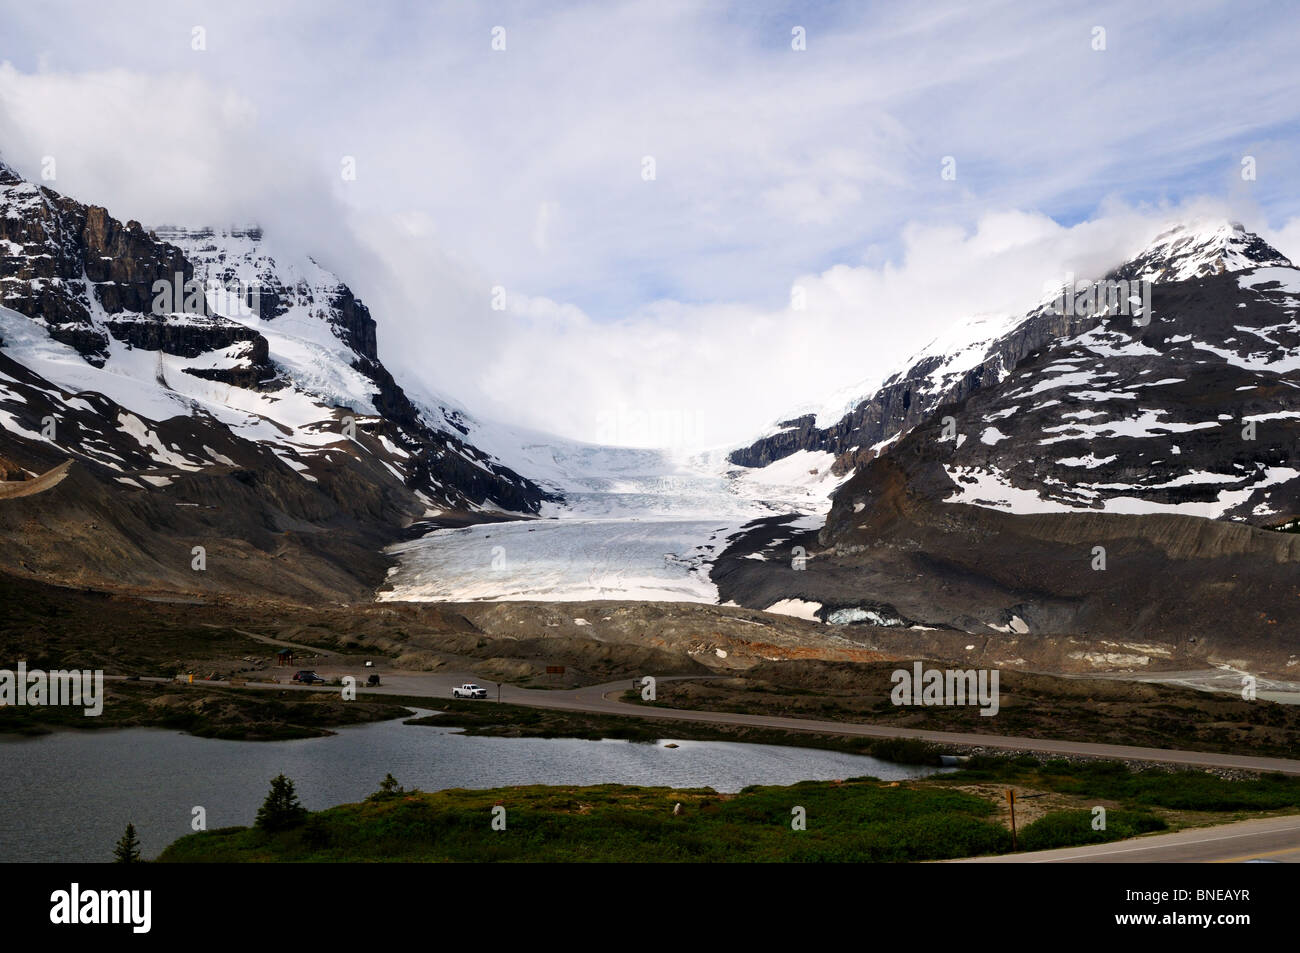 The Athabasca Glacier by the Icefield Parkway. Jasper National Park, Alberta, Canada. Stock Photo